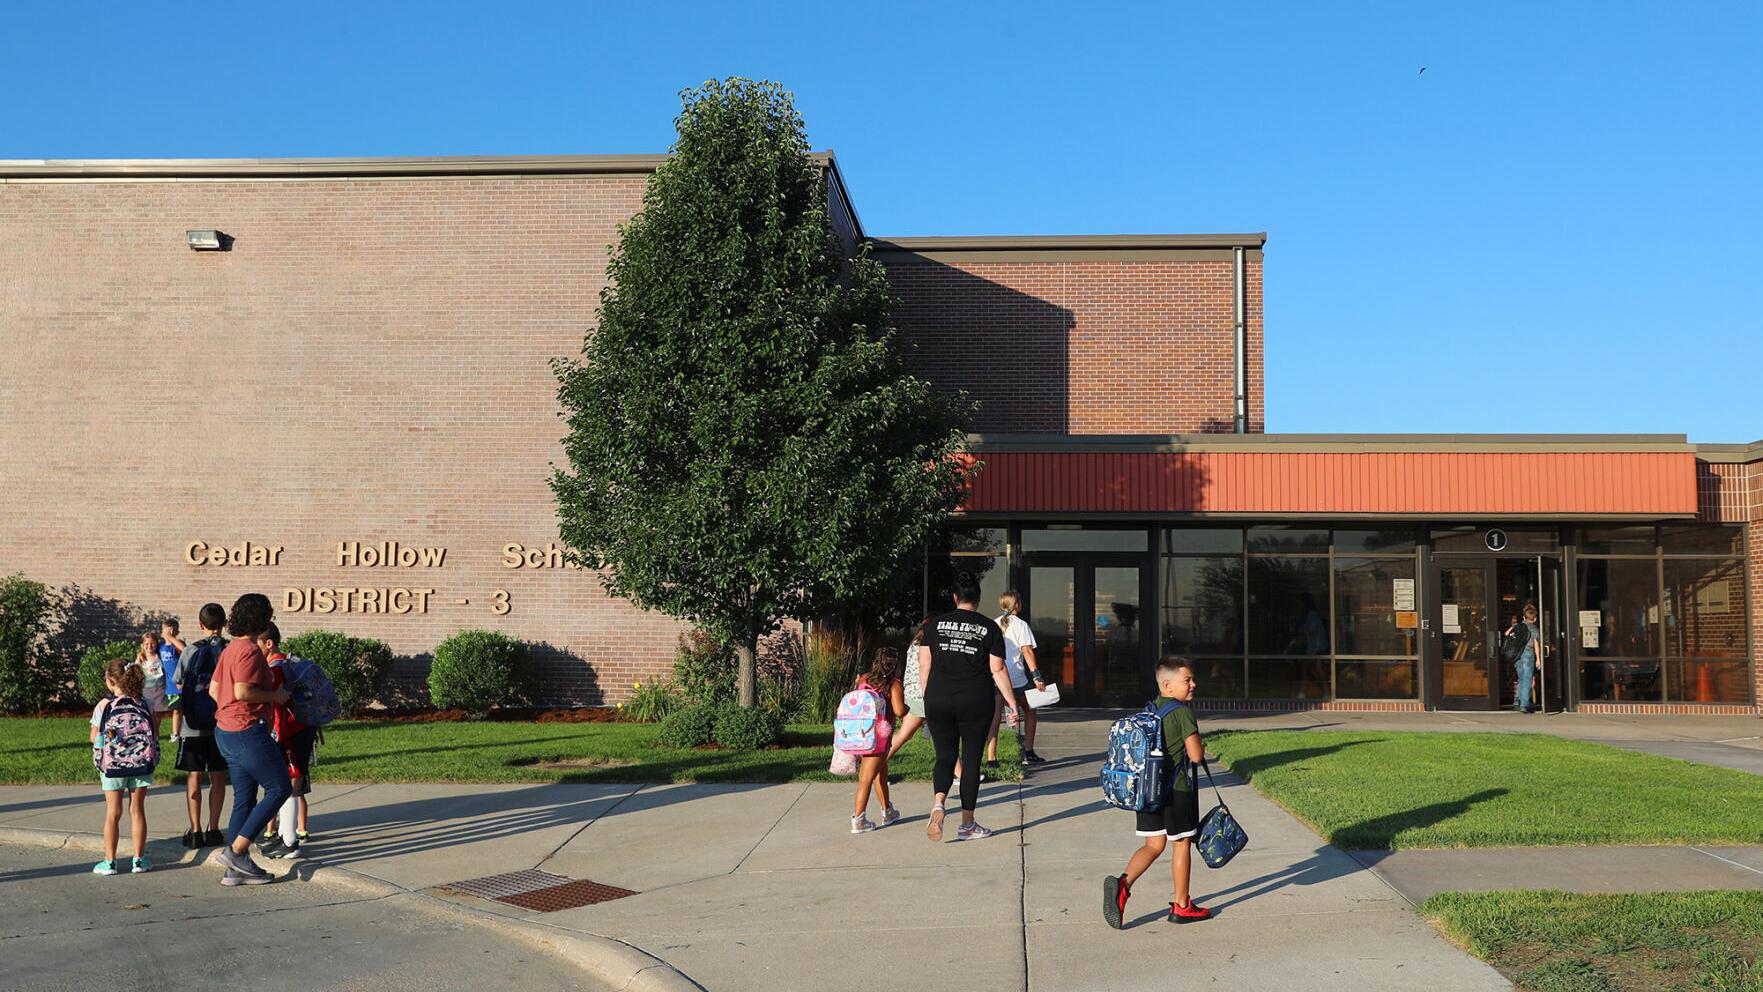 What's Going On: It's back-to-school time for Grand Island students